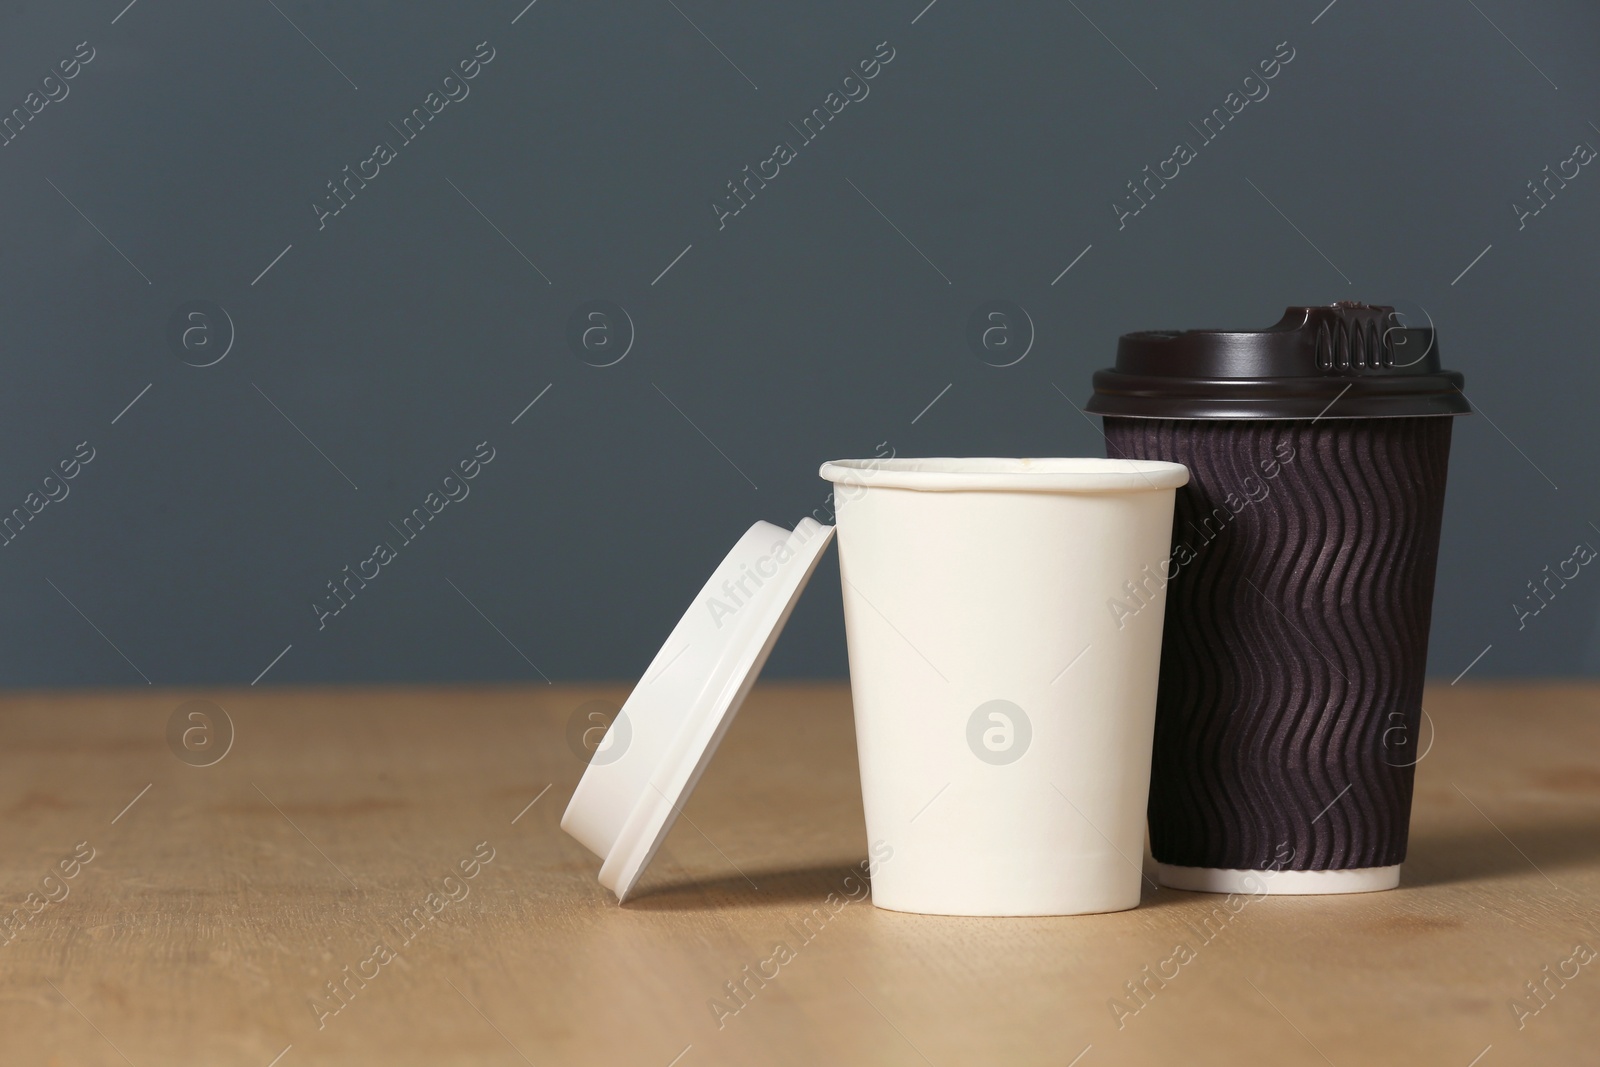 Photo of Cardboard cups of coffee on table against grey background. Space for text